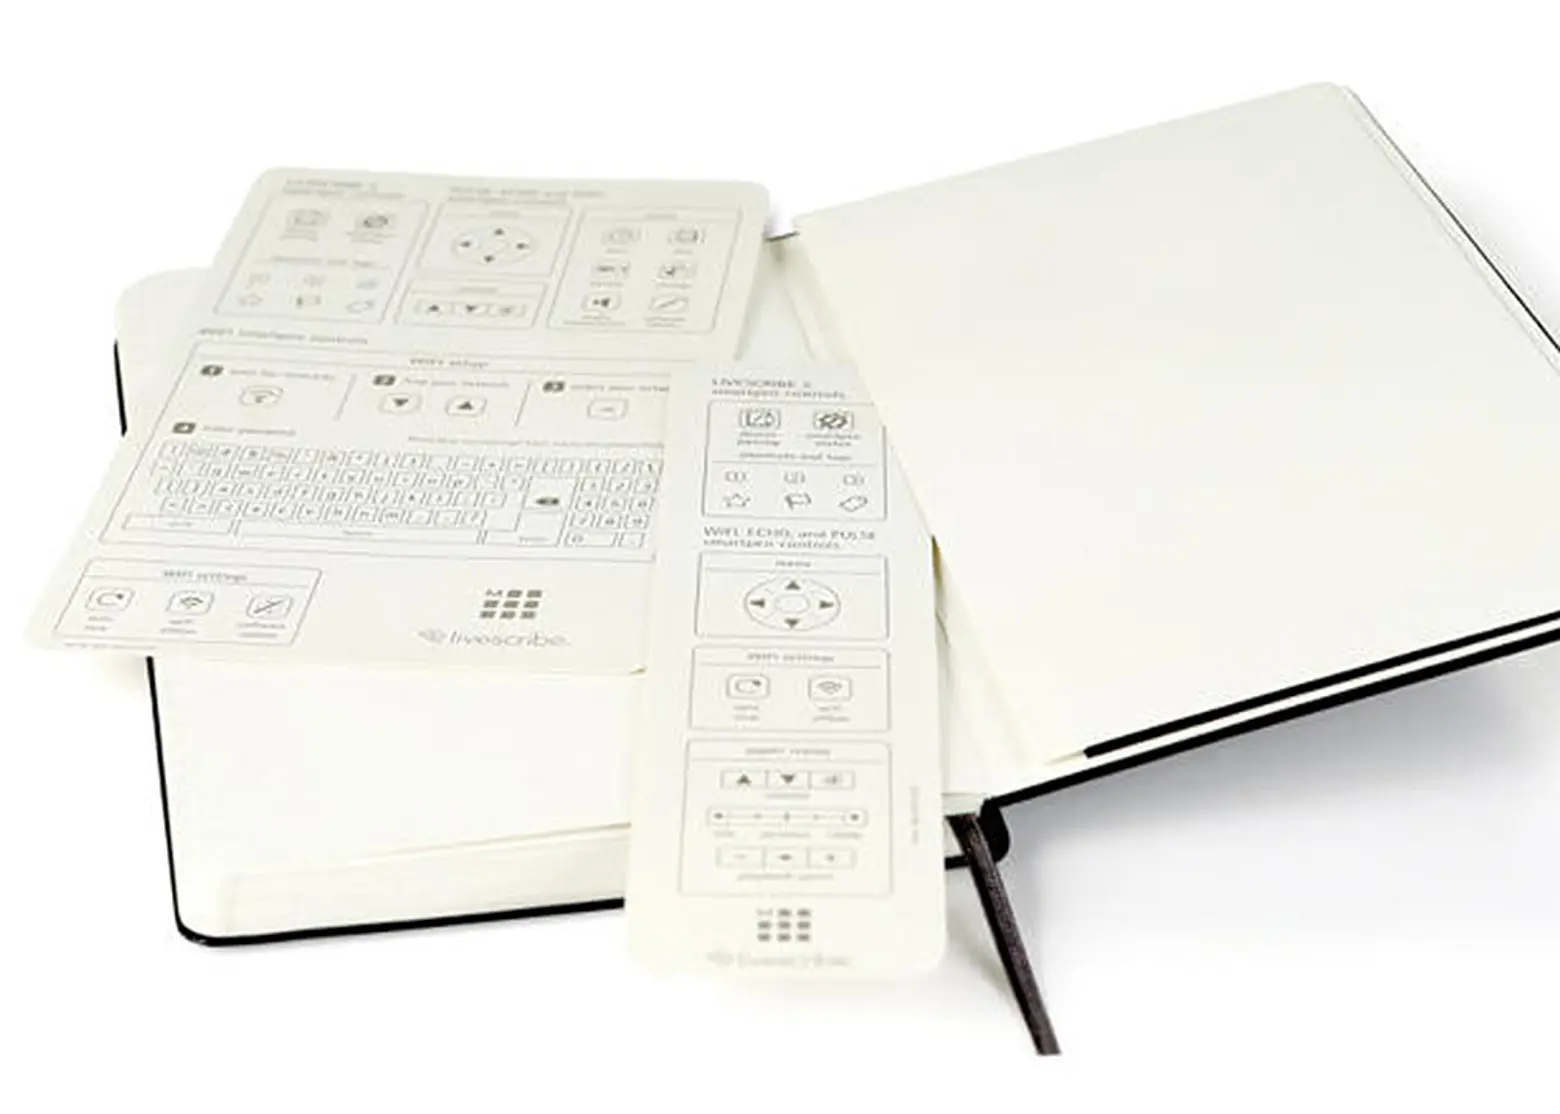 Moleskine, Livescribe Notebook, iPad compatible, notebook, automatic back up